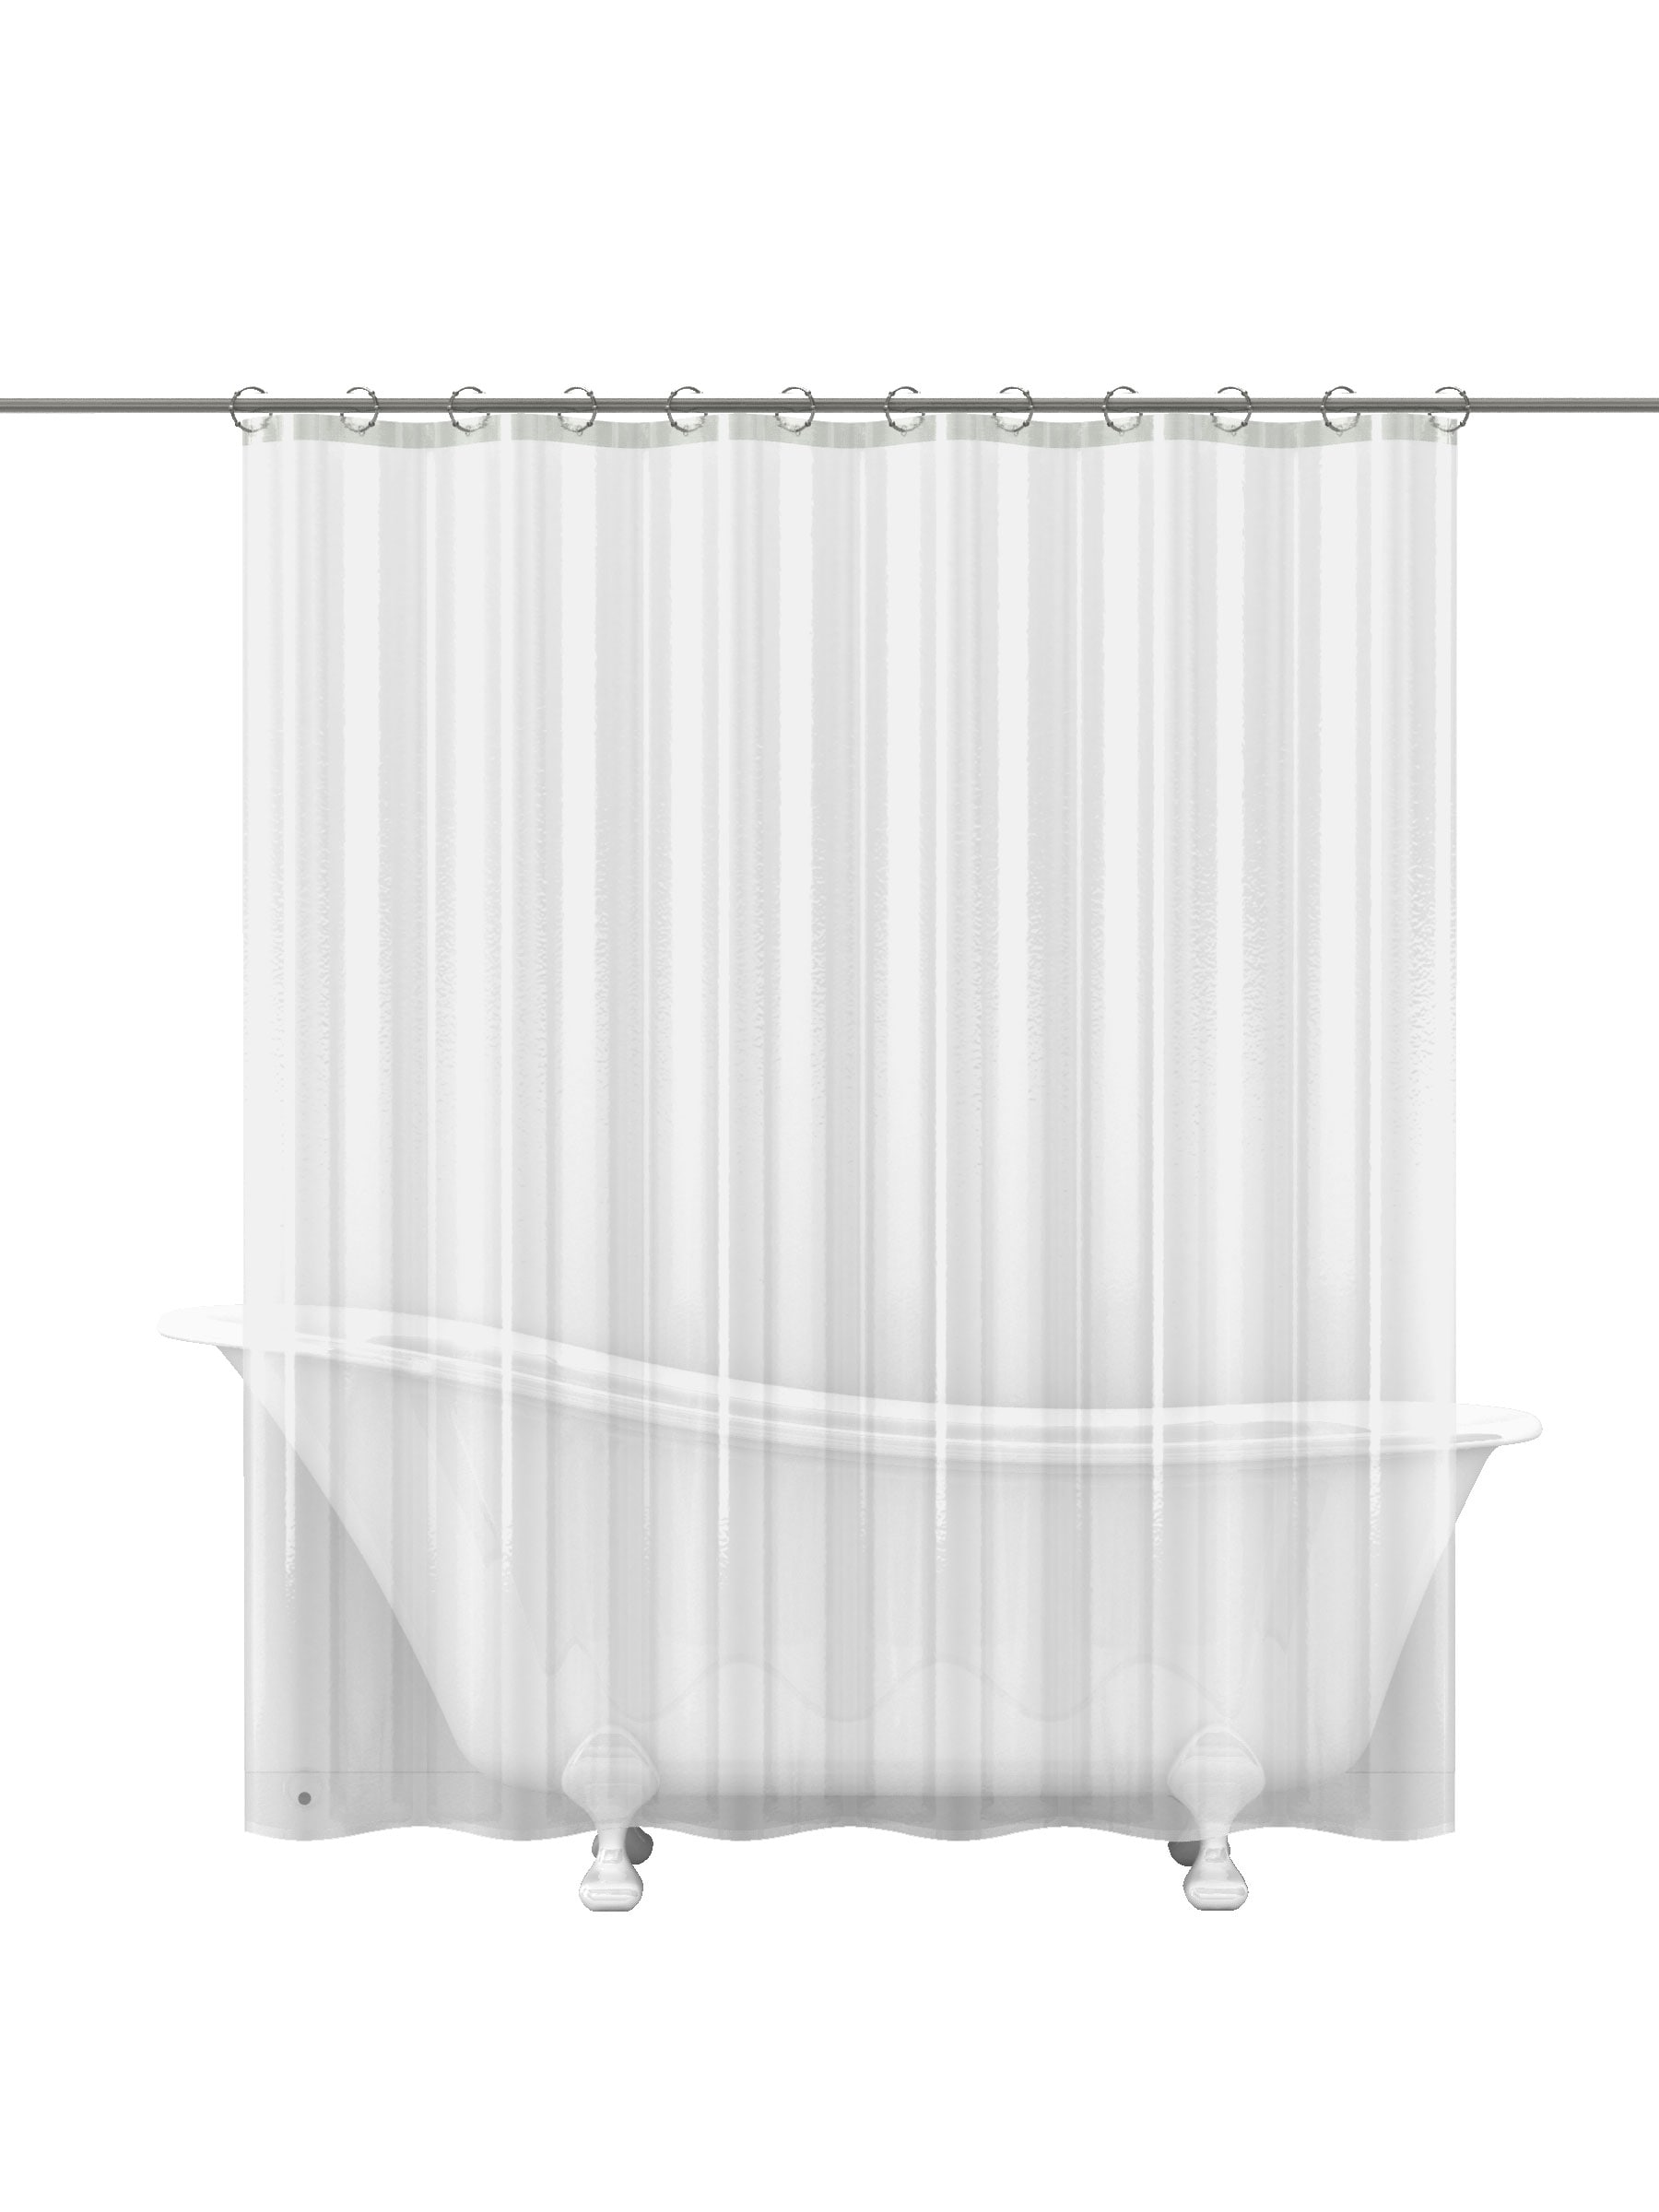 Shower Curtains Liners At Com, Custom Printed Vinyl Shower Curtains